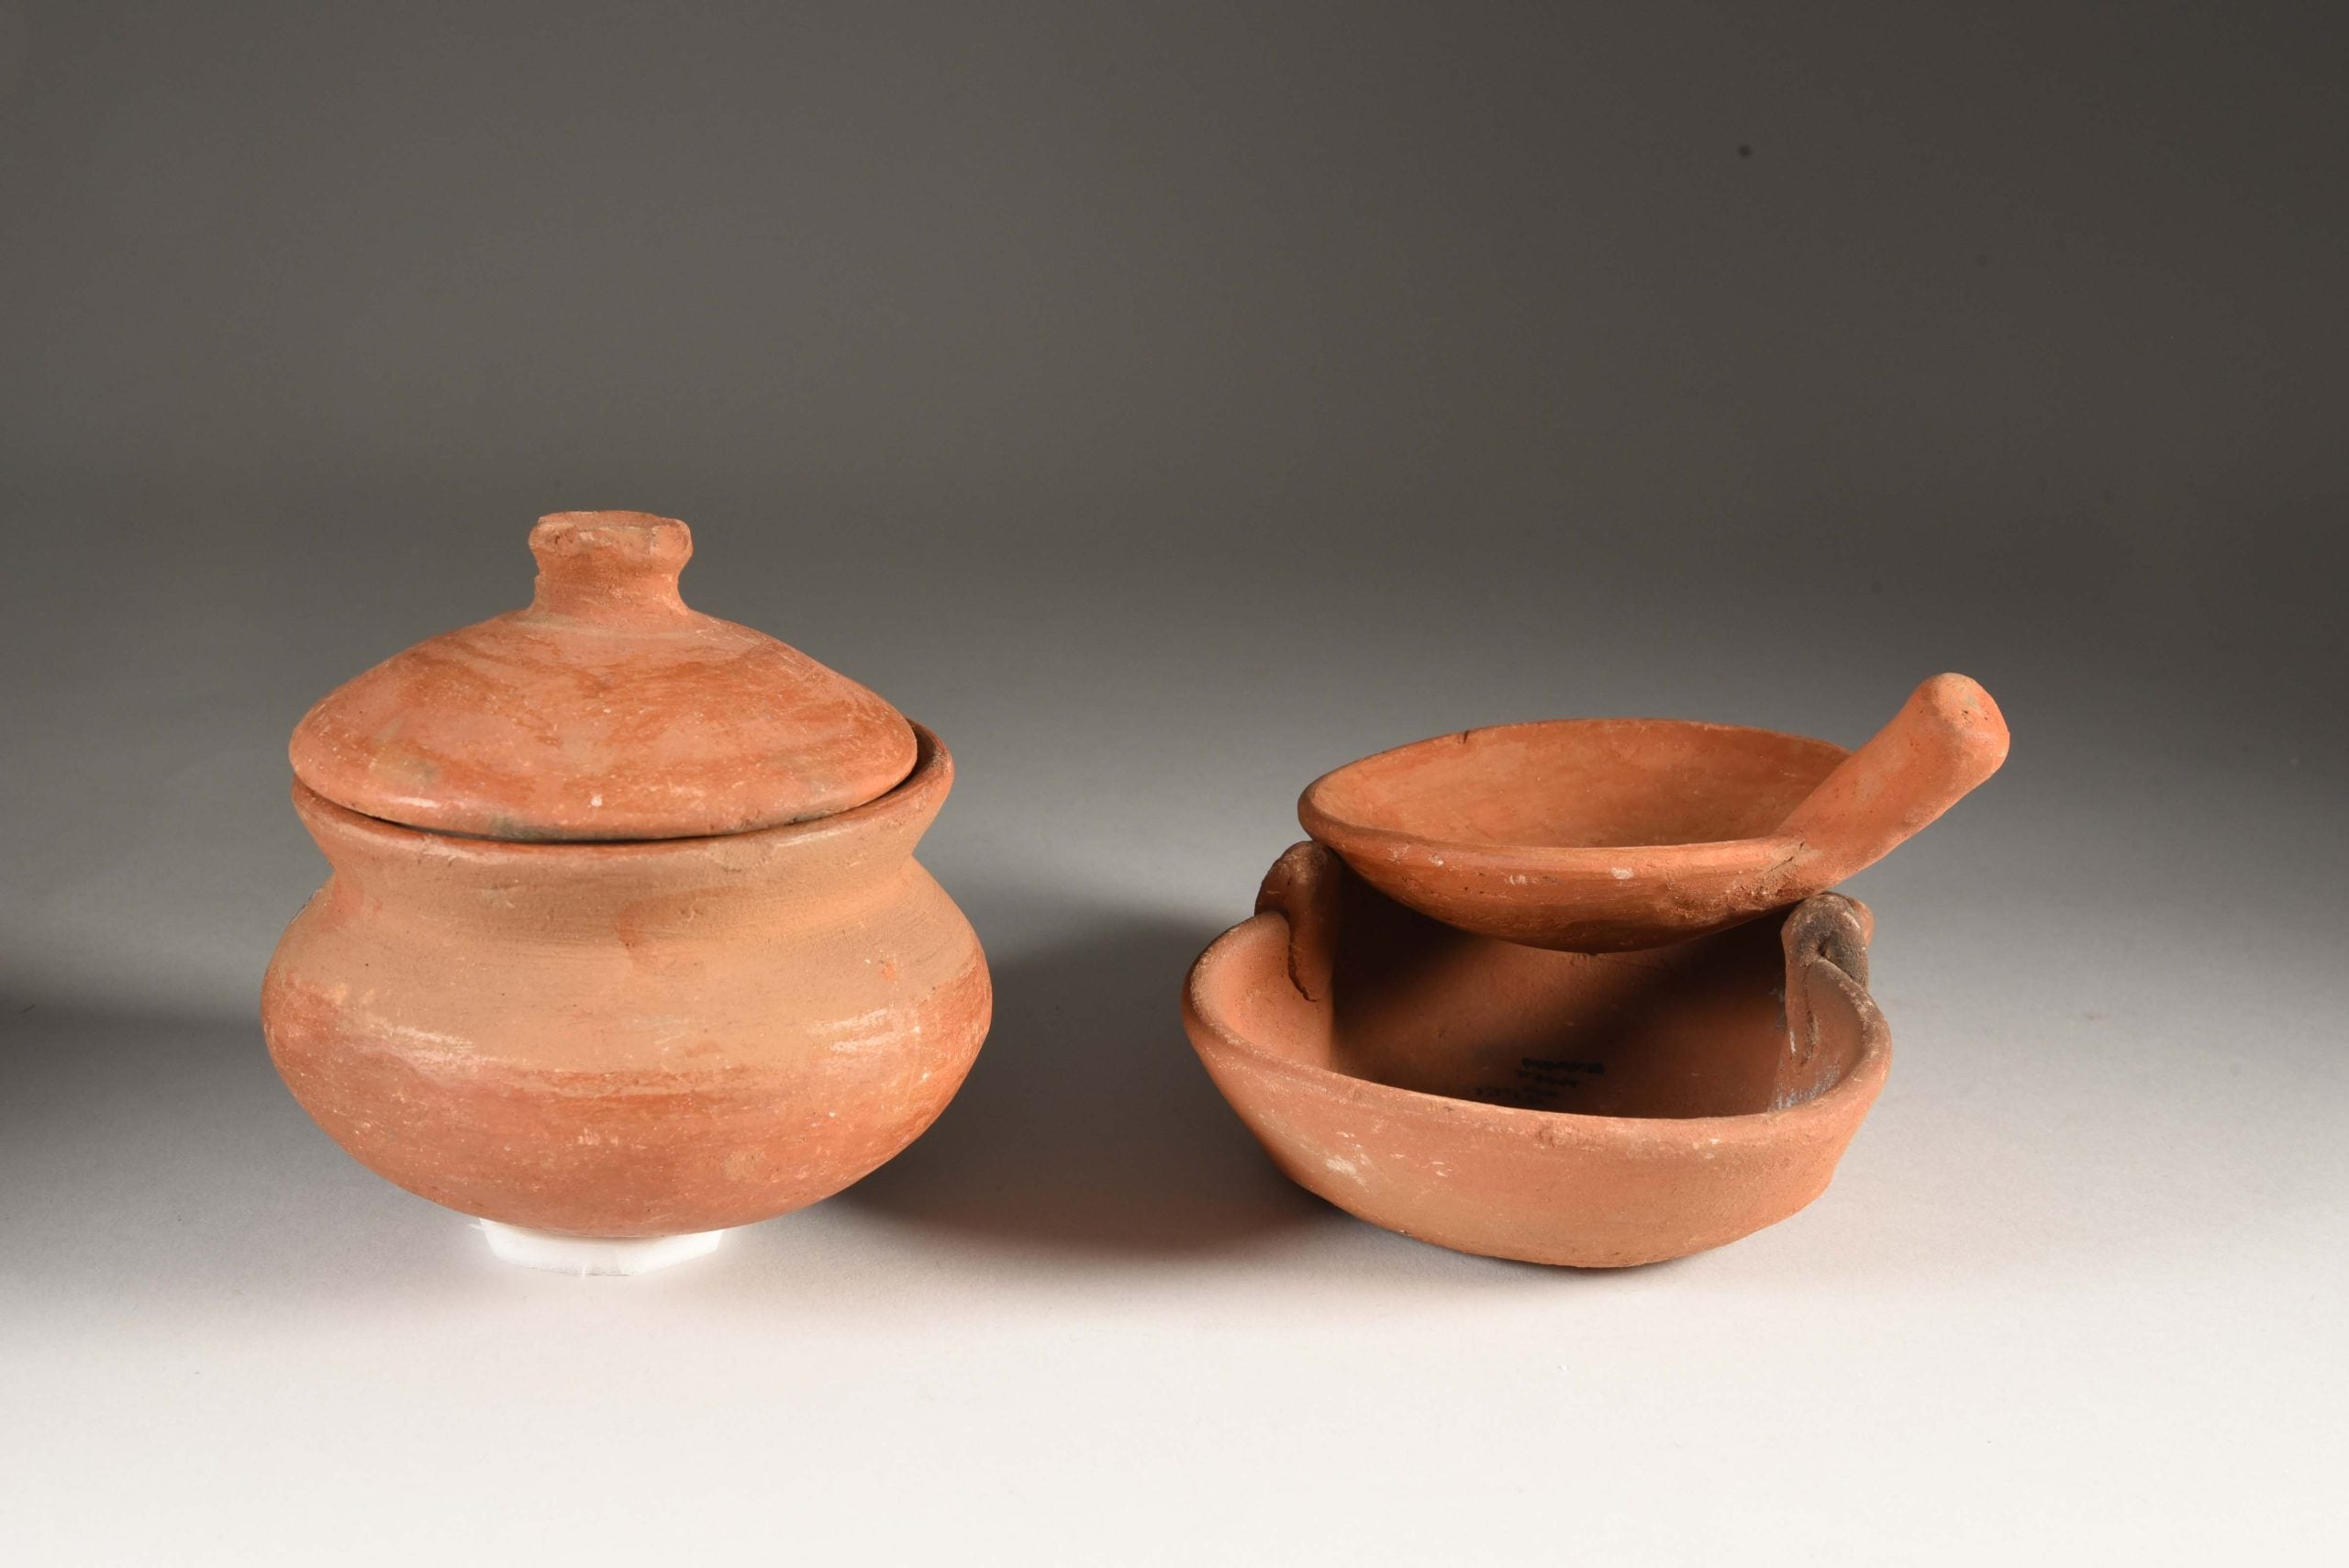 An image of a ceramic pot with a lid, and a frying pan on top of the ceramic stove.